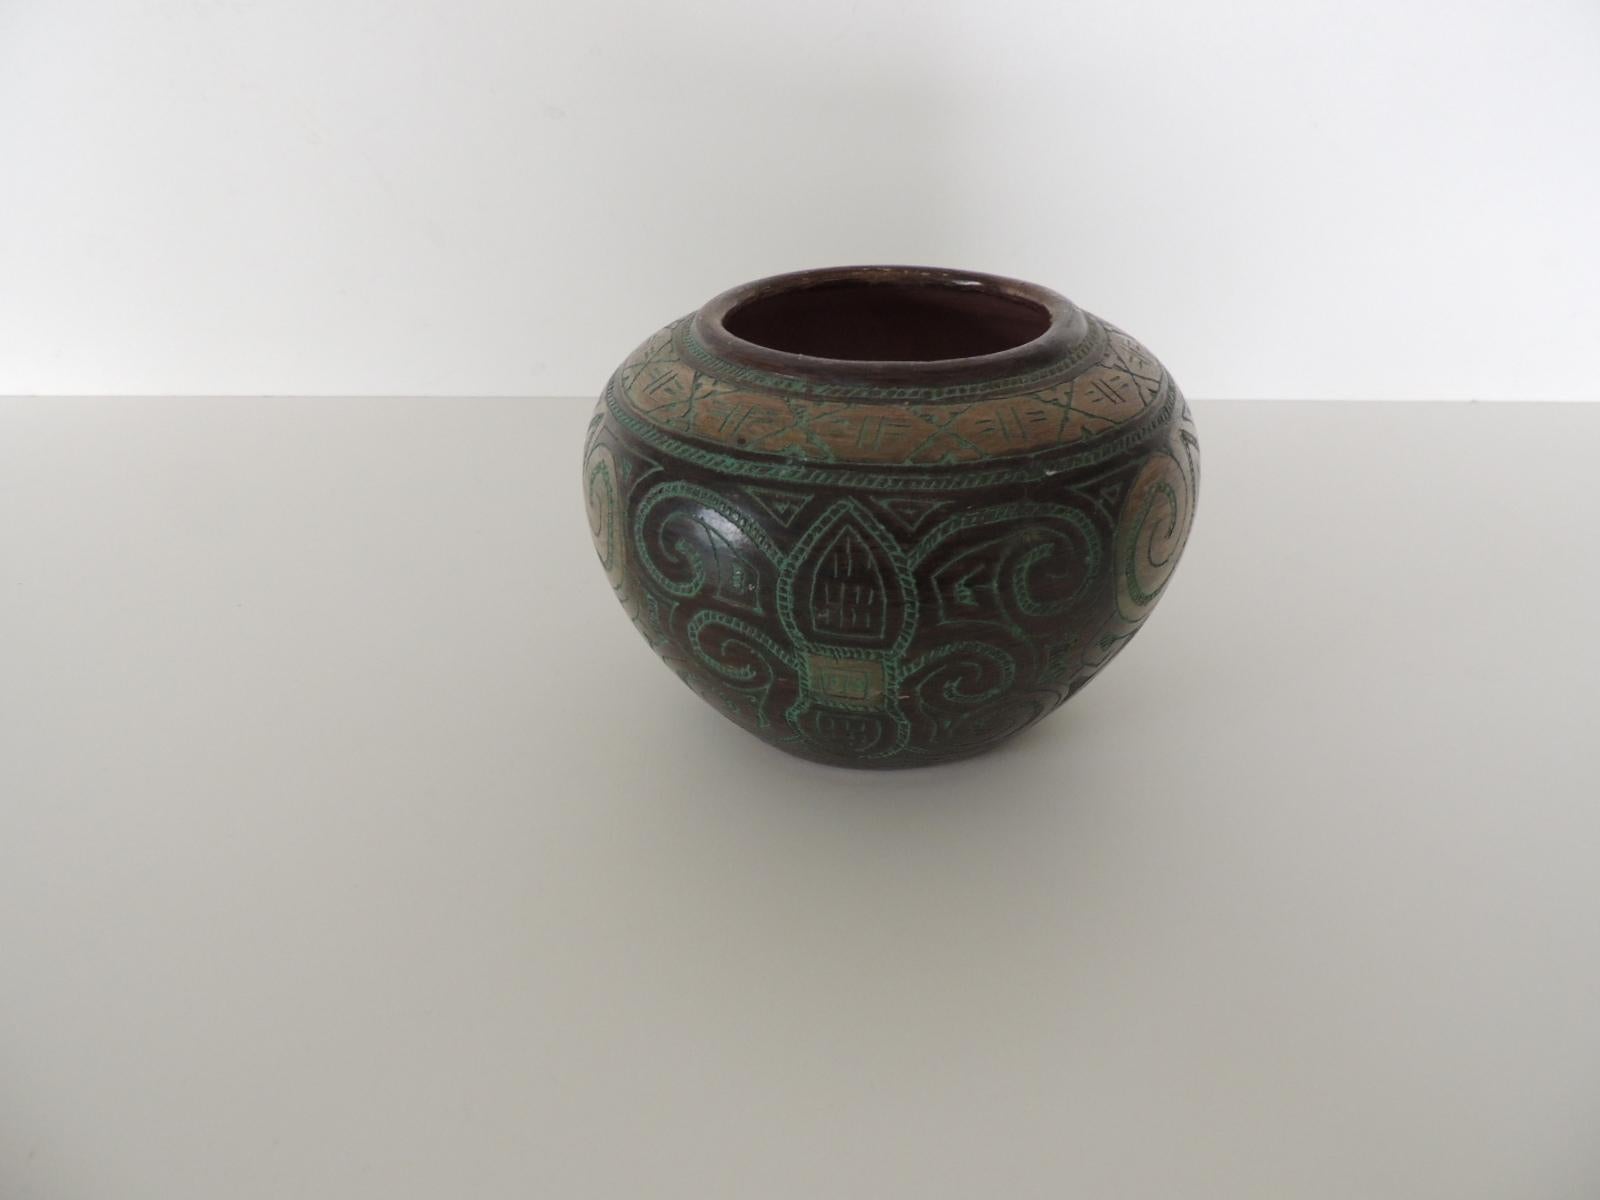 Small green and black vase.
Tribal patterns hand carved into terracotta.
Size: 6